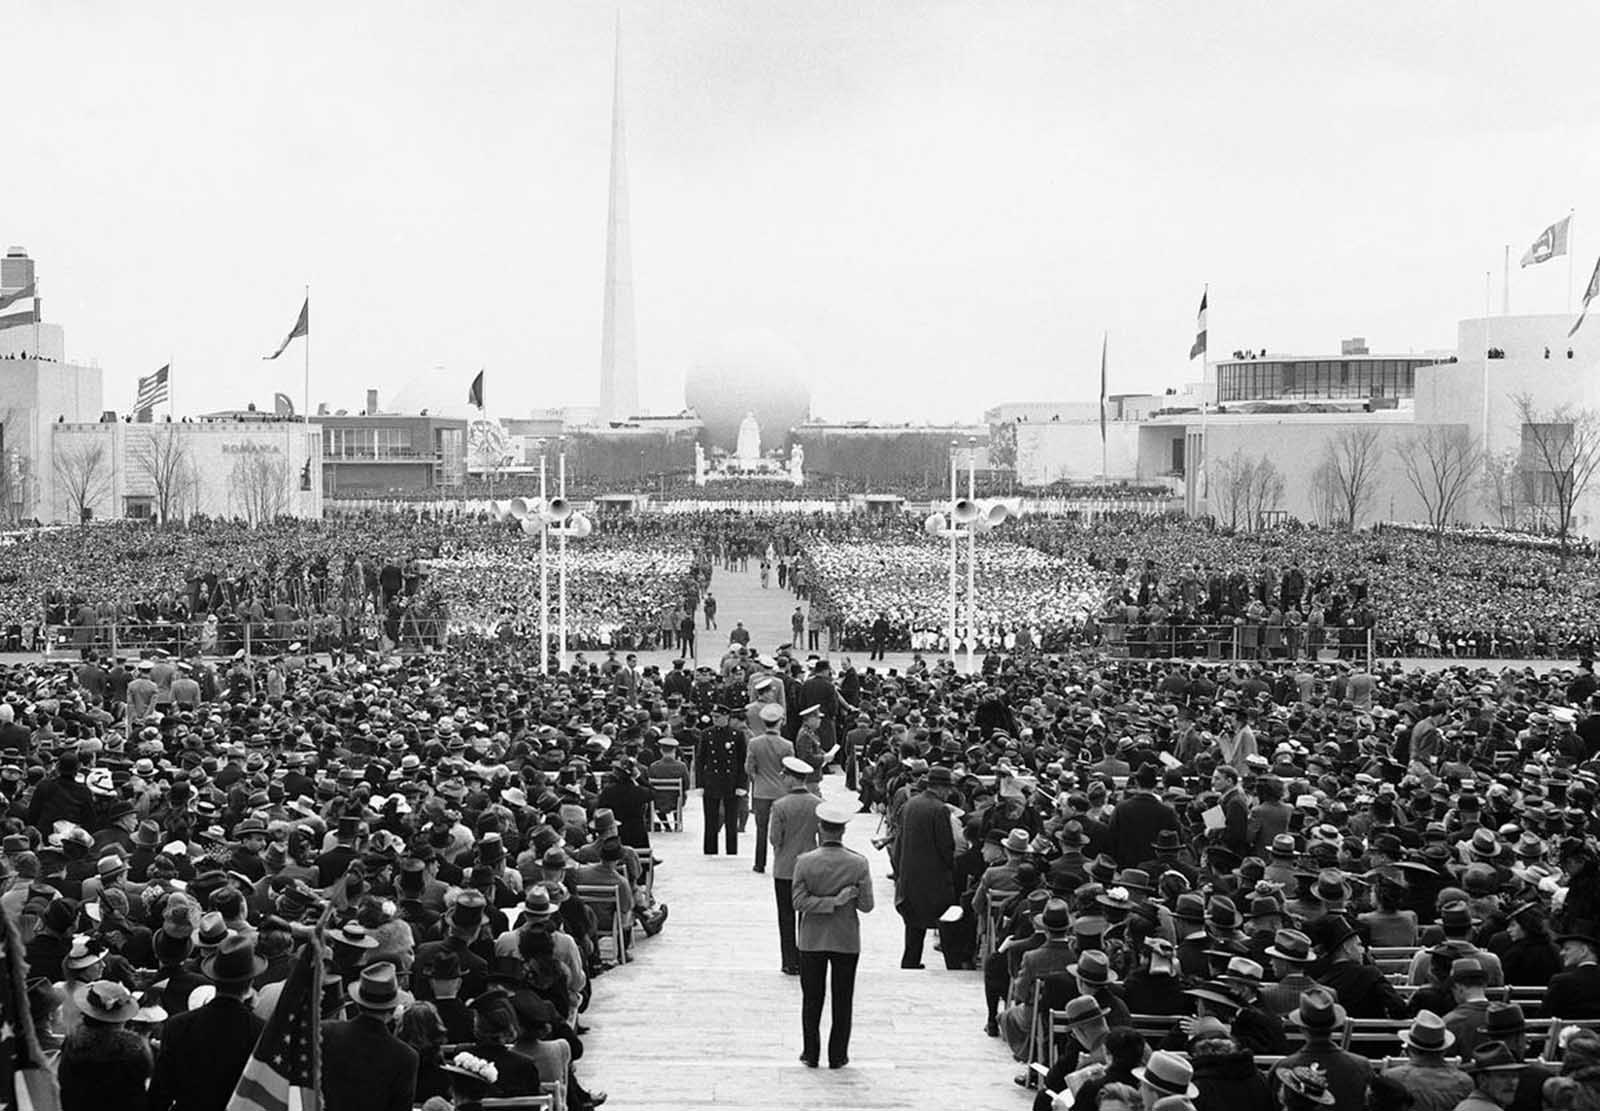 Some of the 35,000 guests of honor who listened to the opening speeches in the Court of Peace at the New York World's Fair, on April 30, 1939.